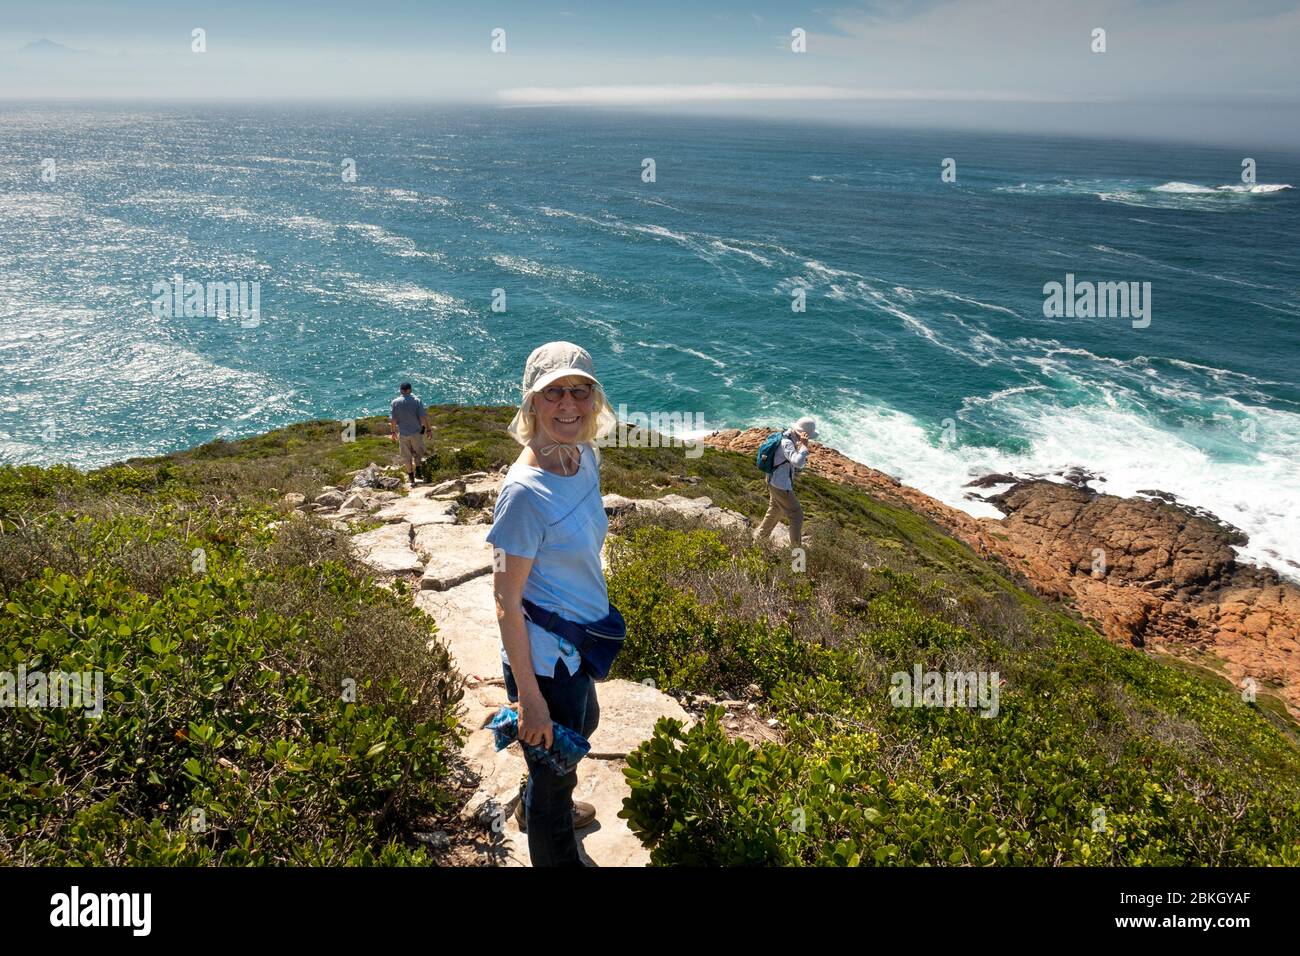 South Africa, Western Cape, Plettenberg Bay, Robberg Nature Reserve, Cape Seal, tourists on path above rocky coastline Stock Photo